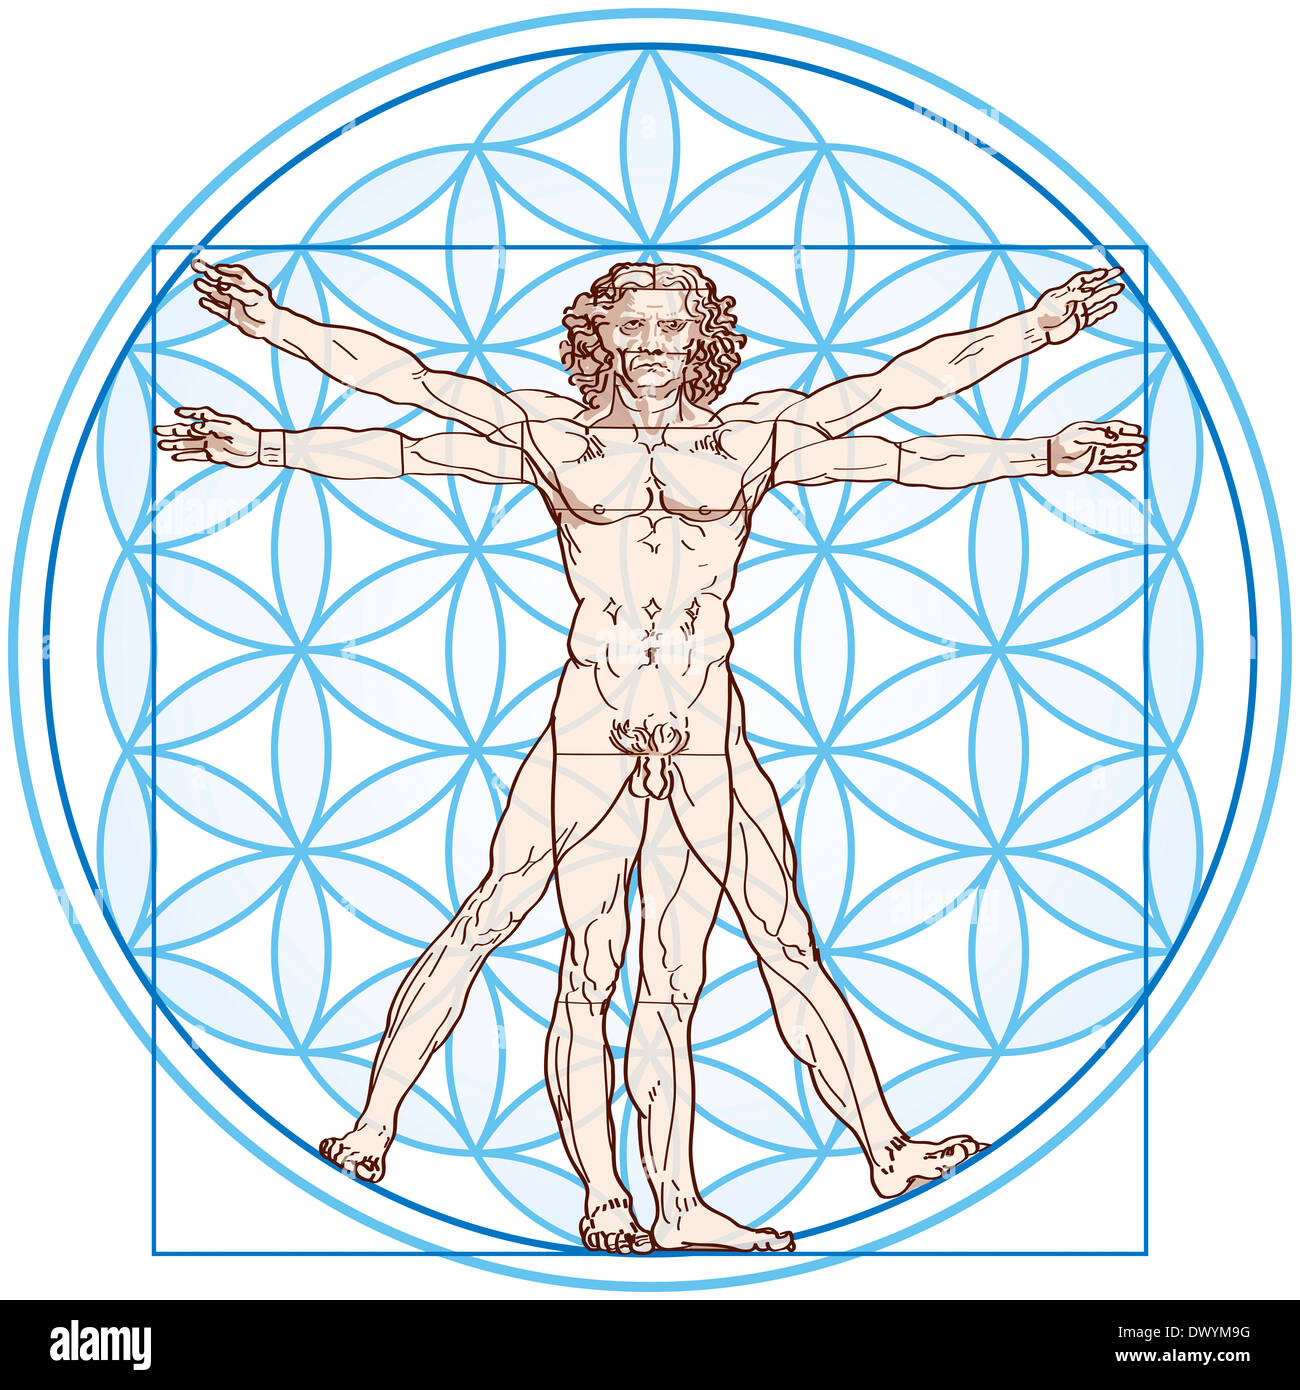 Vitruvian Man fits in the Flower Of Life. Stock Photo